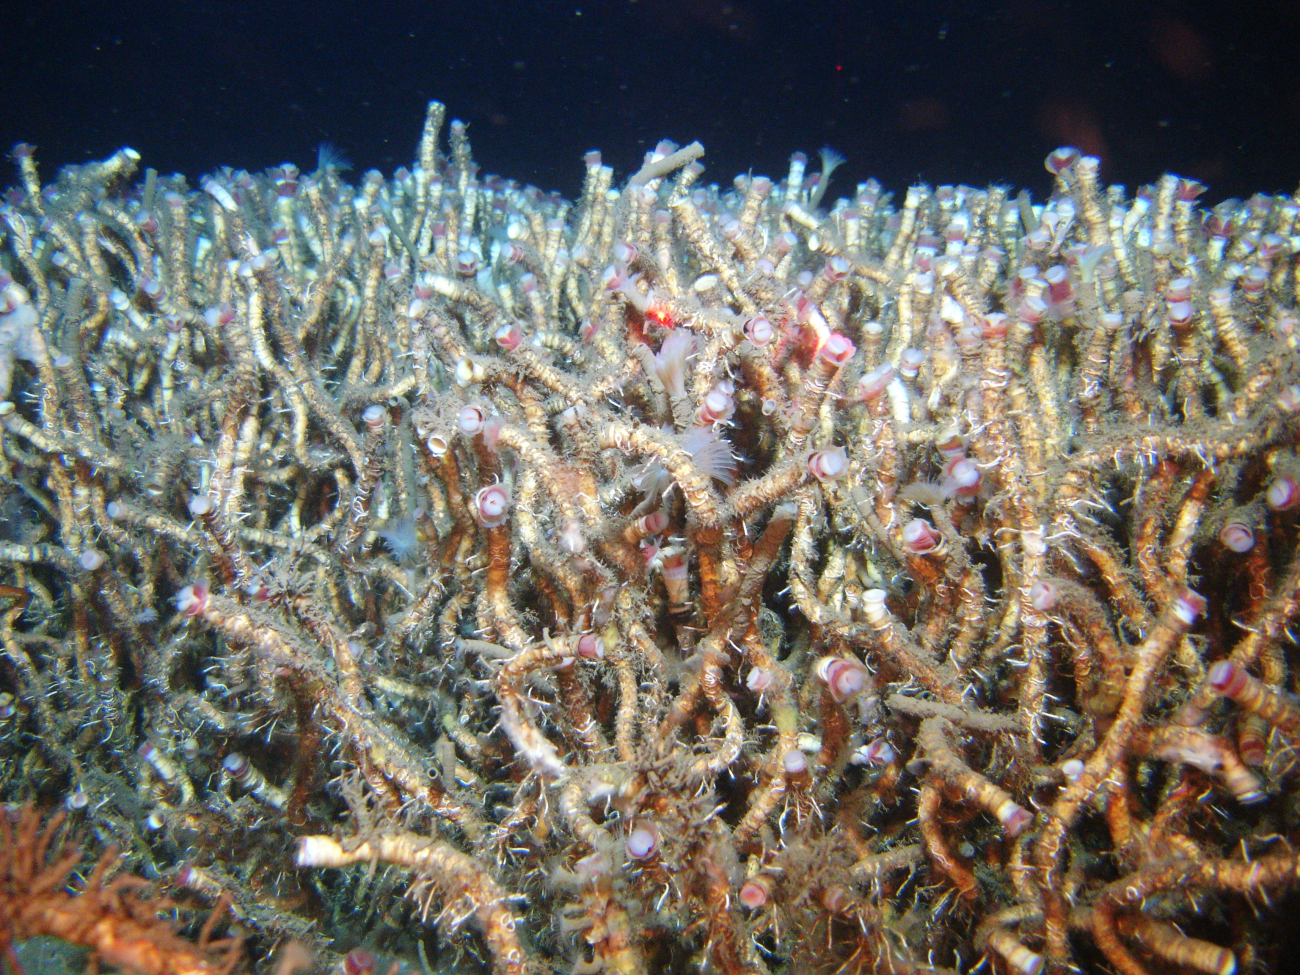 A thicket of lamellibrachian tube worms at a cold seep site